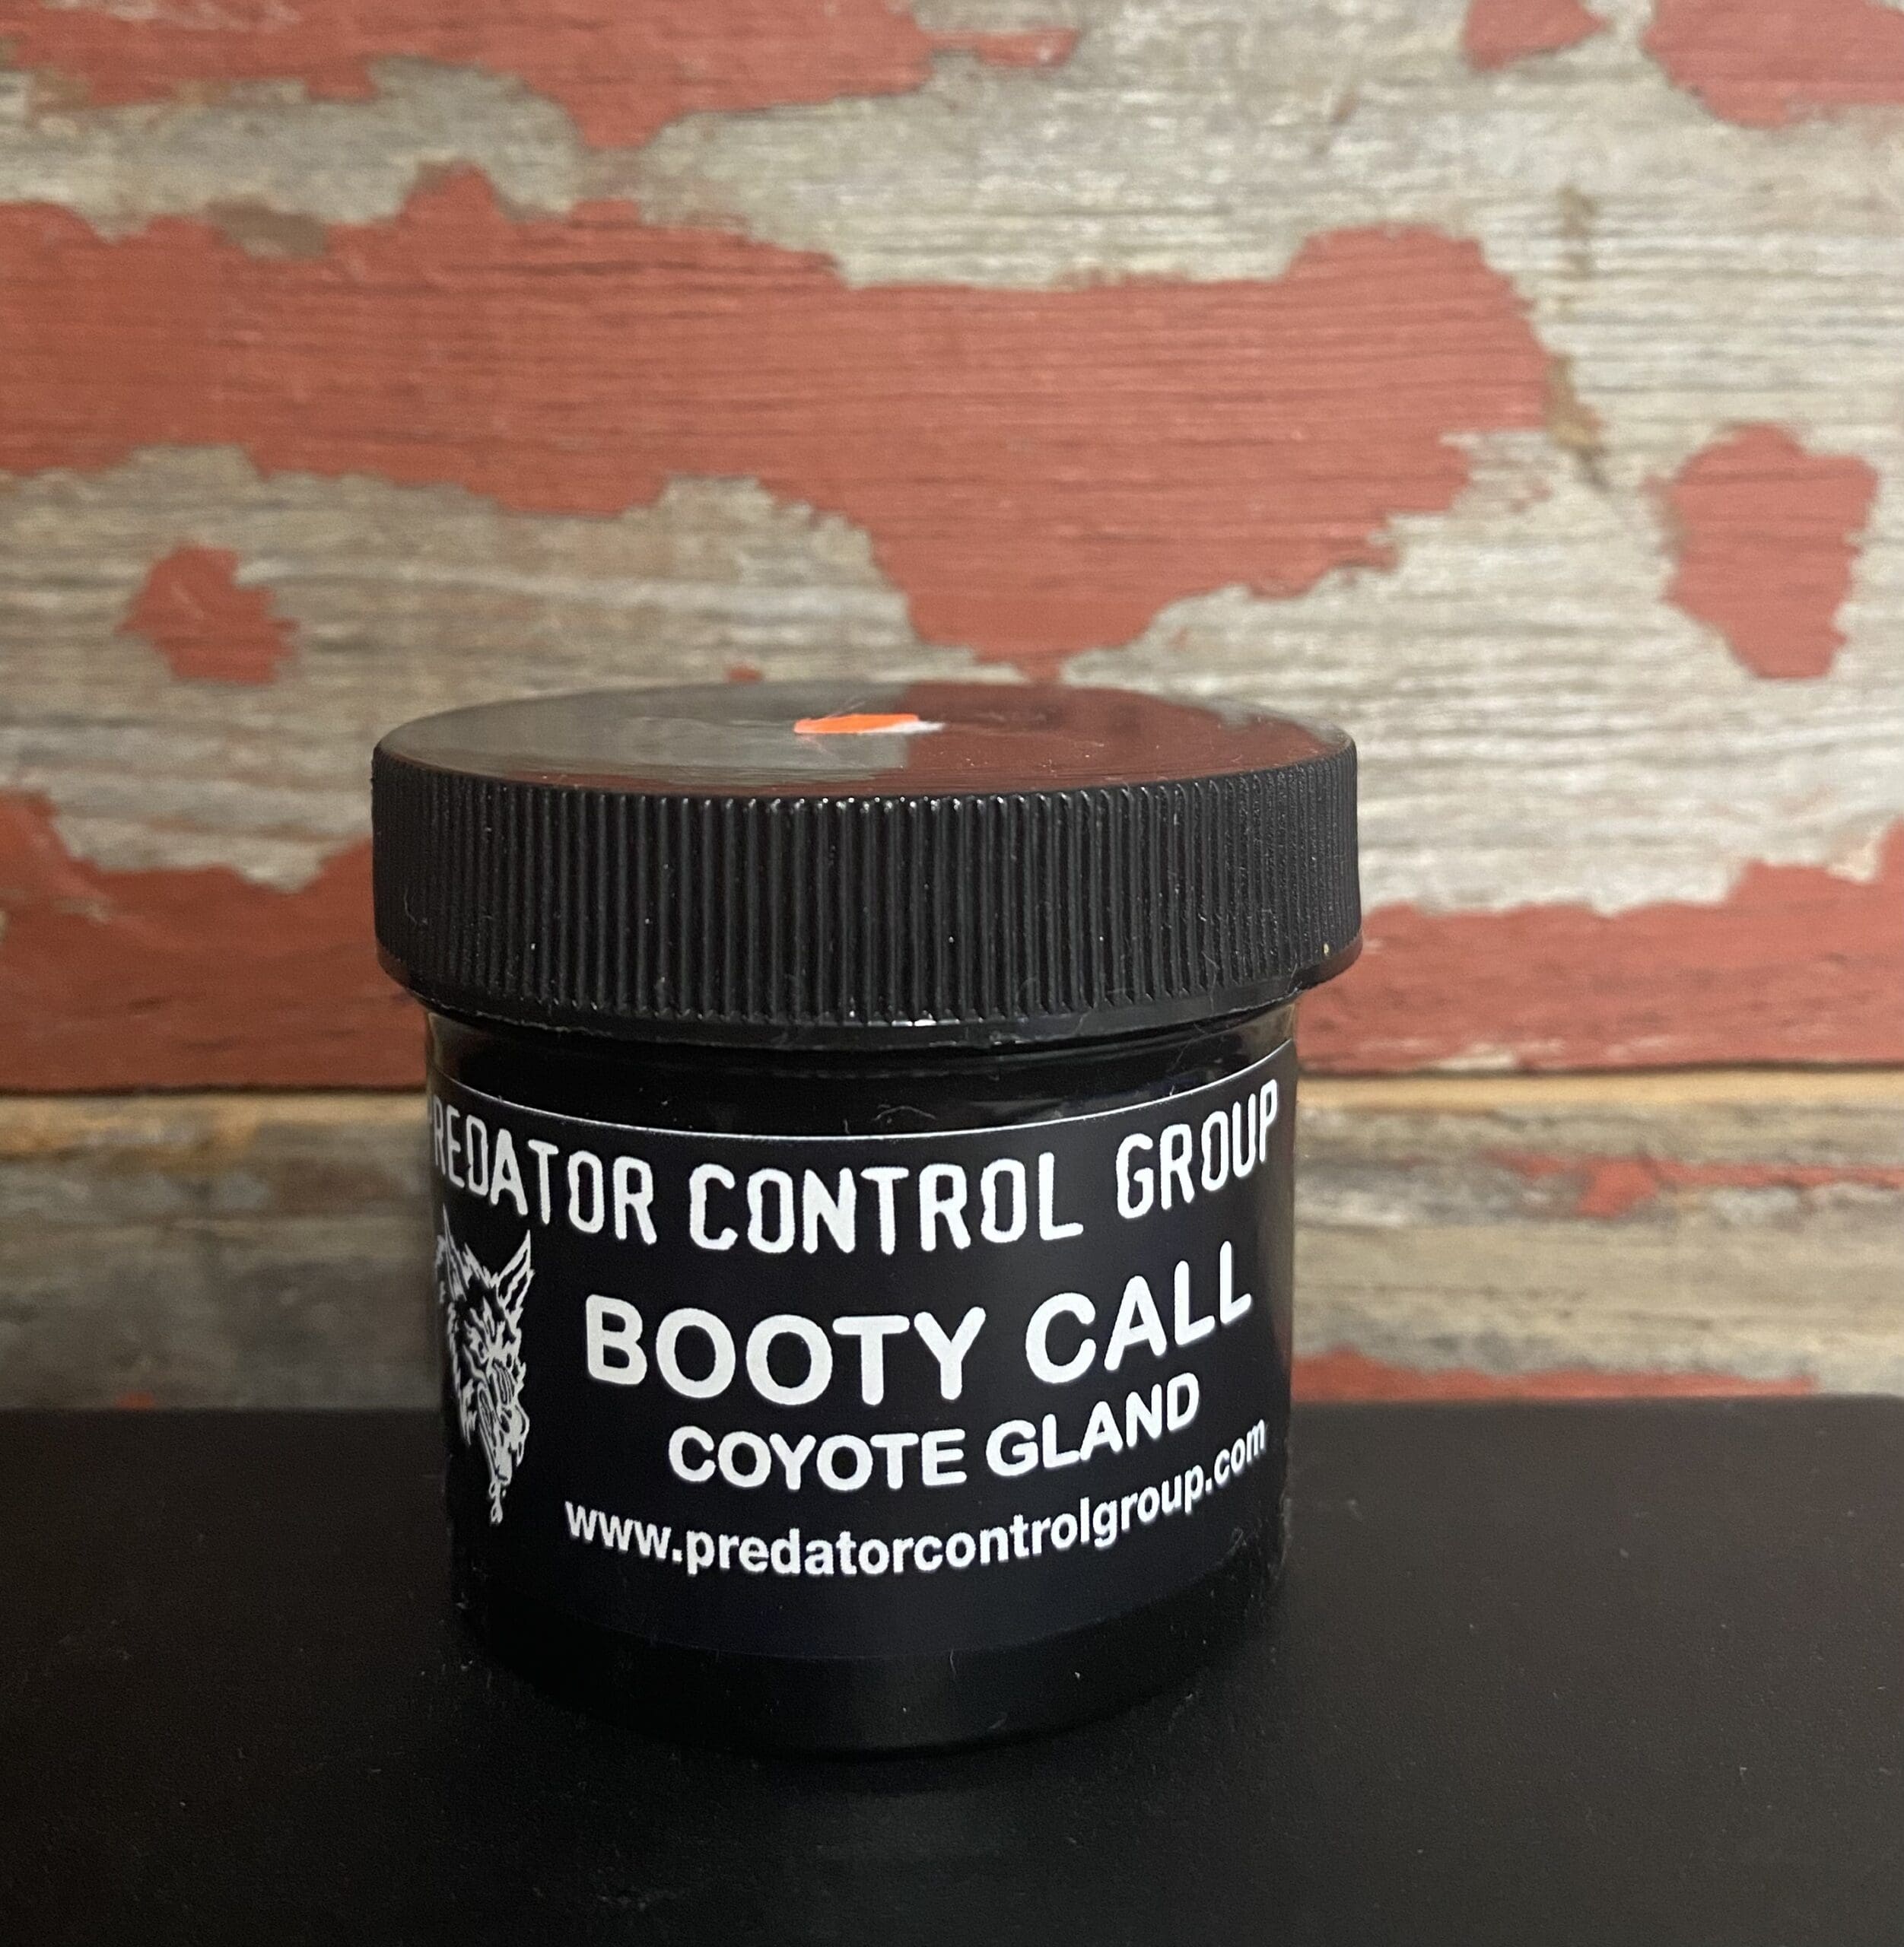 Coyote Gland, BOOTY CALL, coyote lure is a fresh coyote Gland with out  adding oils and other products, just clean fresh glands